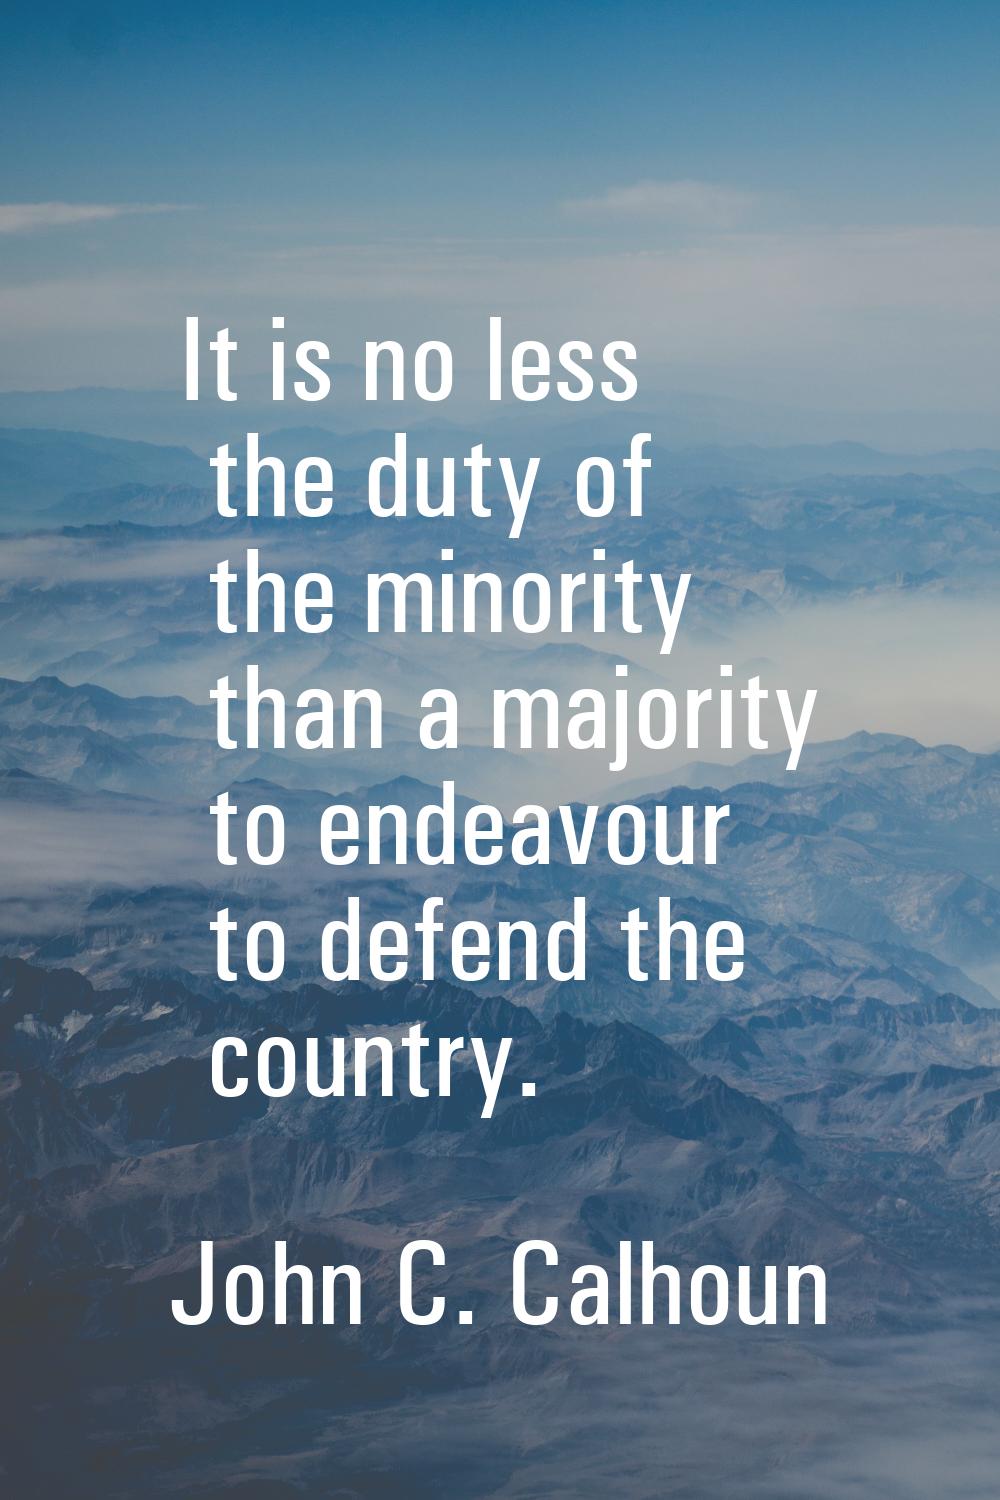 It is no less the duty of the minority than a majority to endeavour to defend the country.